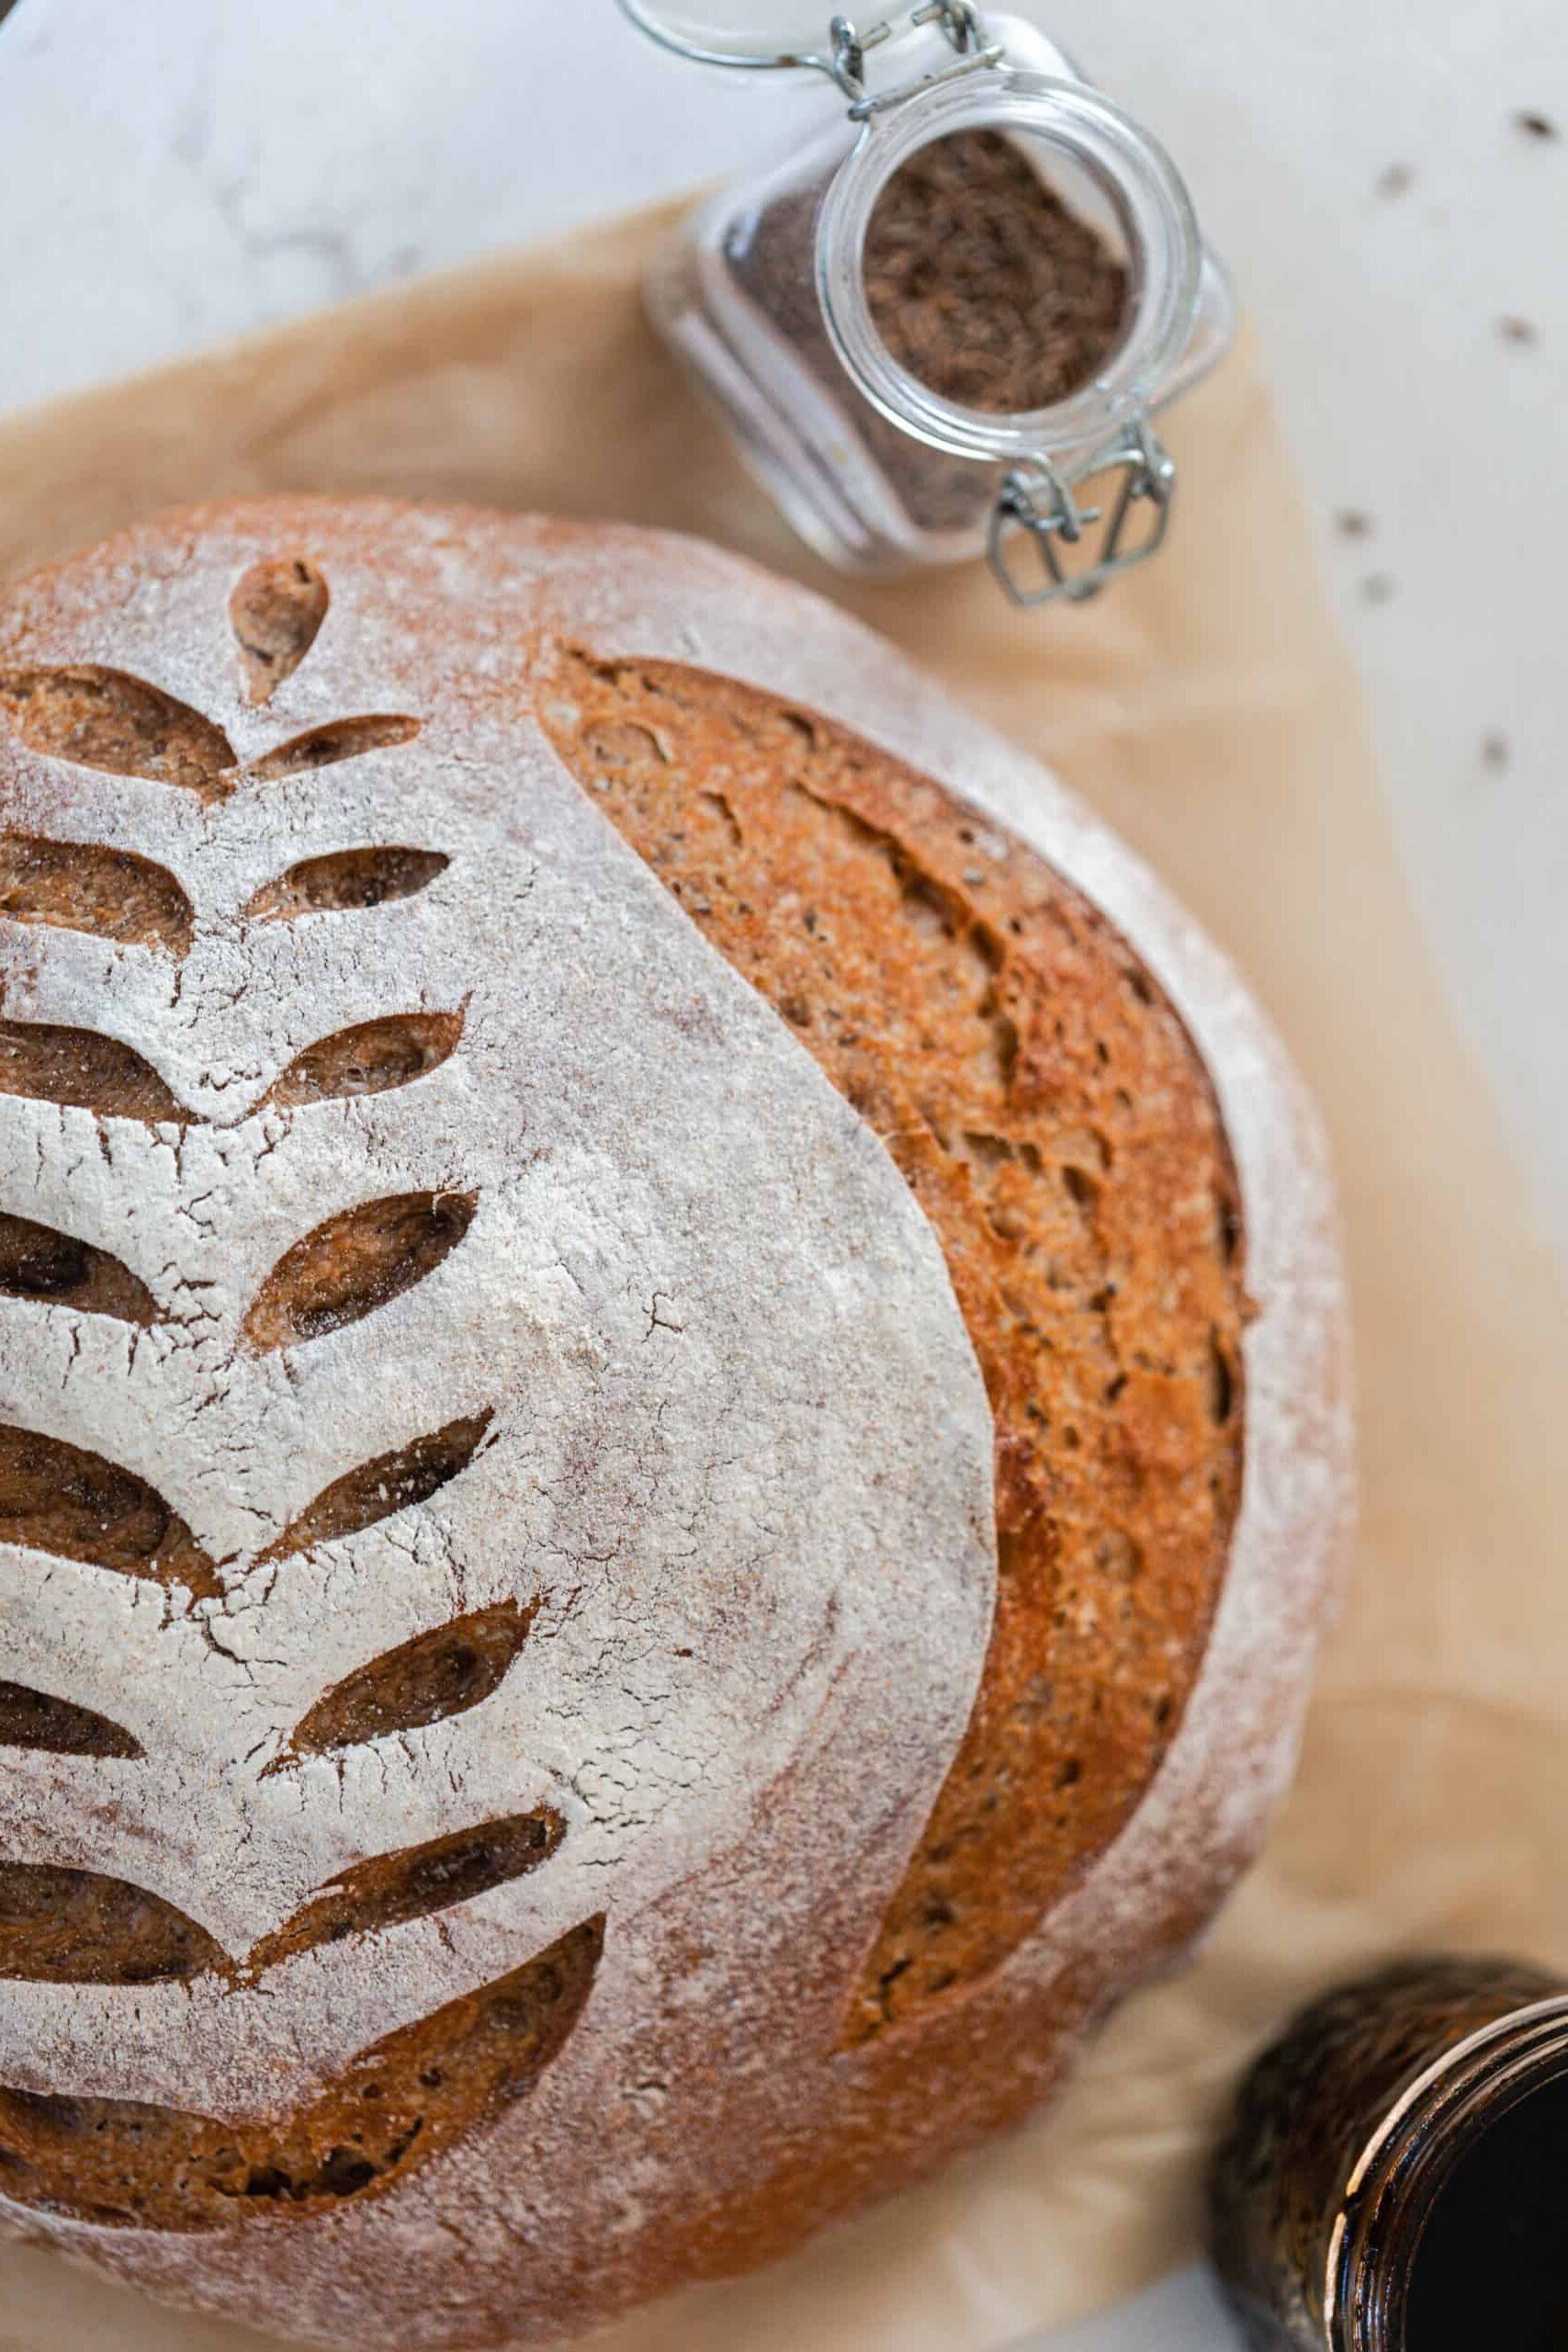 Unlock New Flavors: A Homemade Rye Bread Recipe for The Whole Family